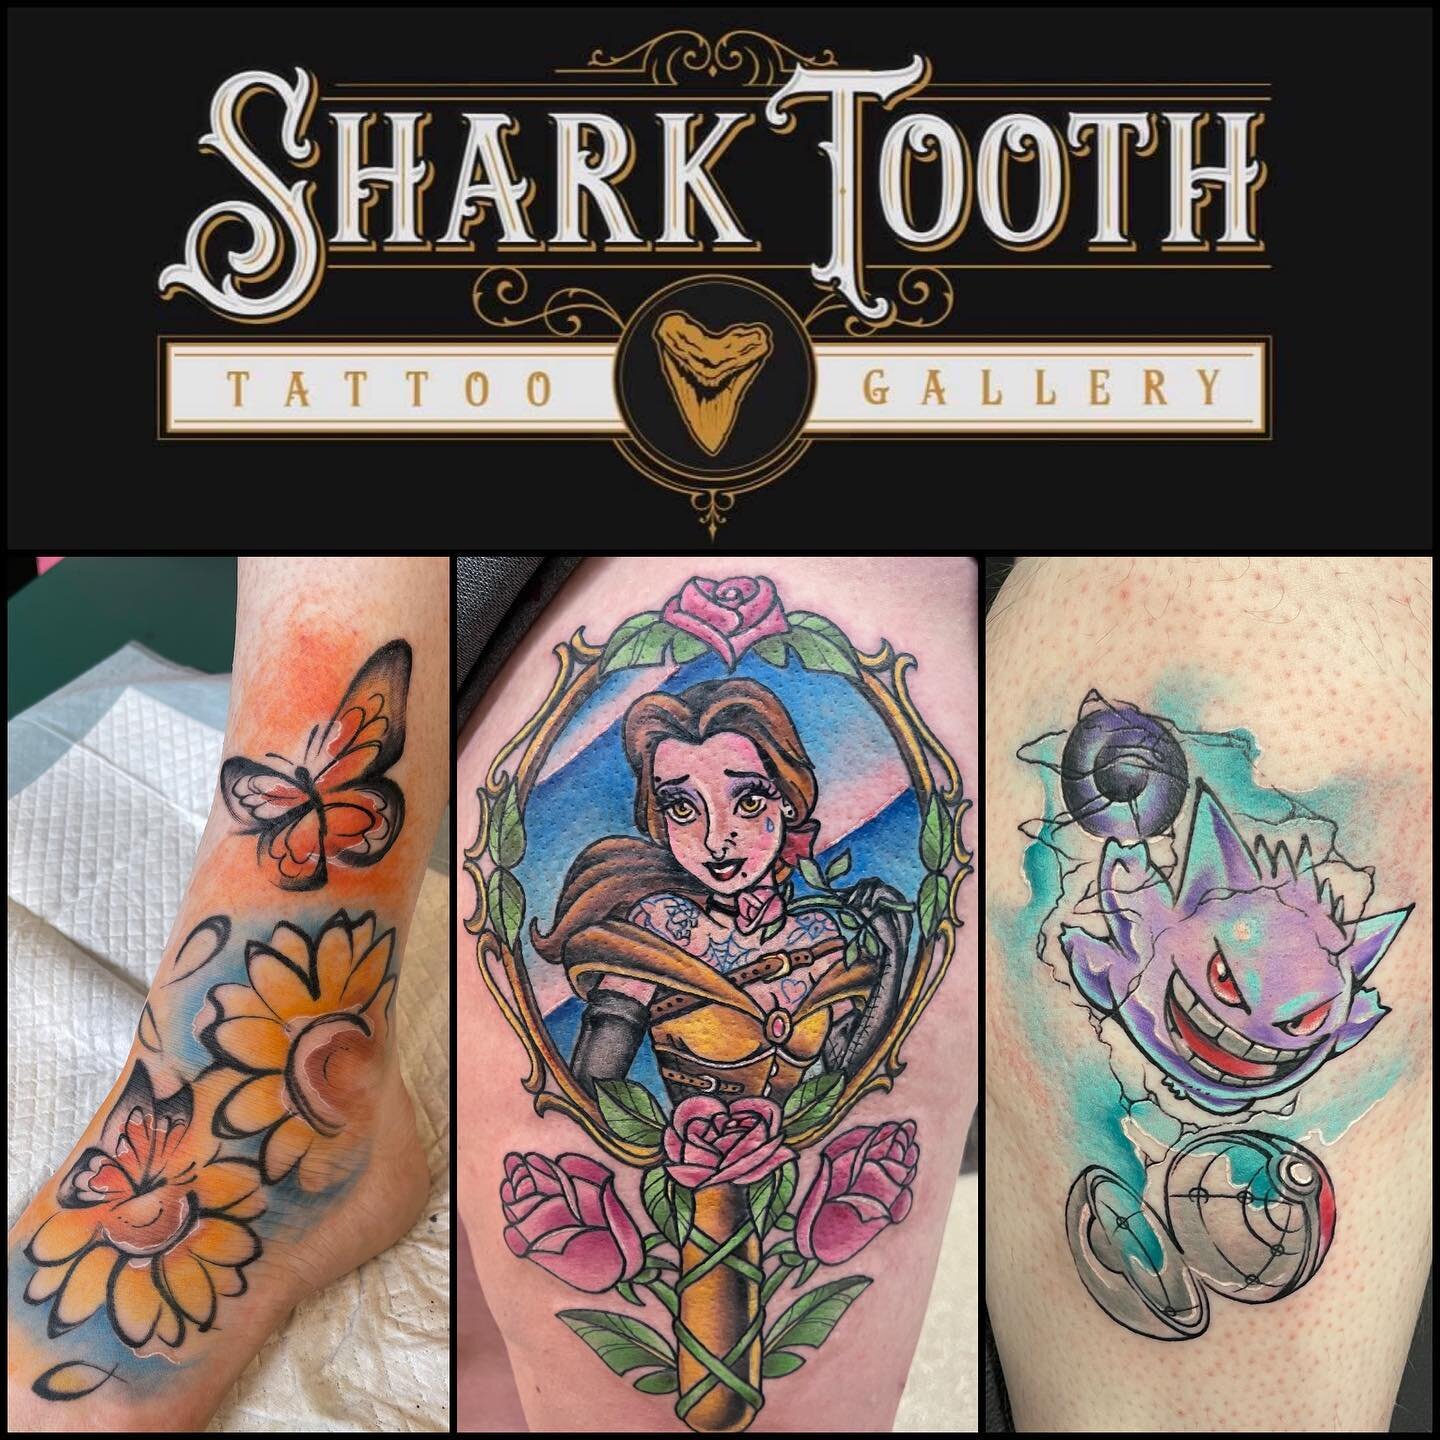 MOVING ANNOUNCEMENT PLEASE READ

I know you&rsquo;ve all been excited to see where I&rsquo;m going to be tattooing and I&rsquo;m happy to announce that after March 11th I&rsquo;m going to SharkTooth Tattoo &amp; Gallery in Lakeville! I can&rsquo;t wa